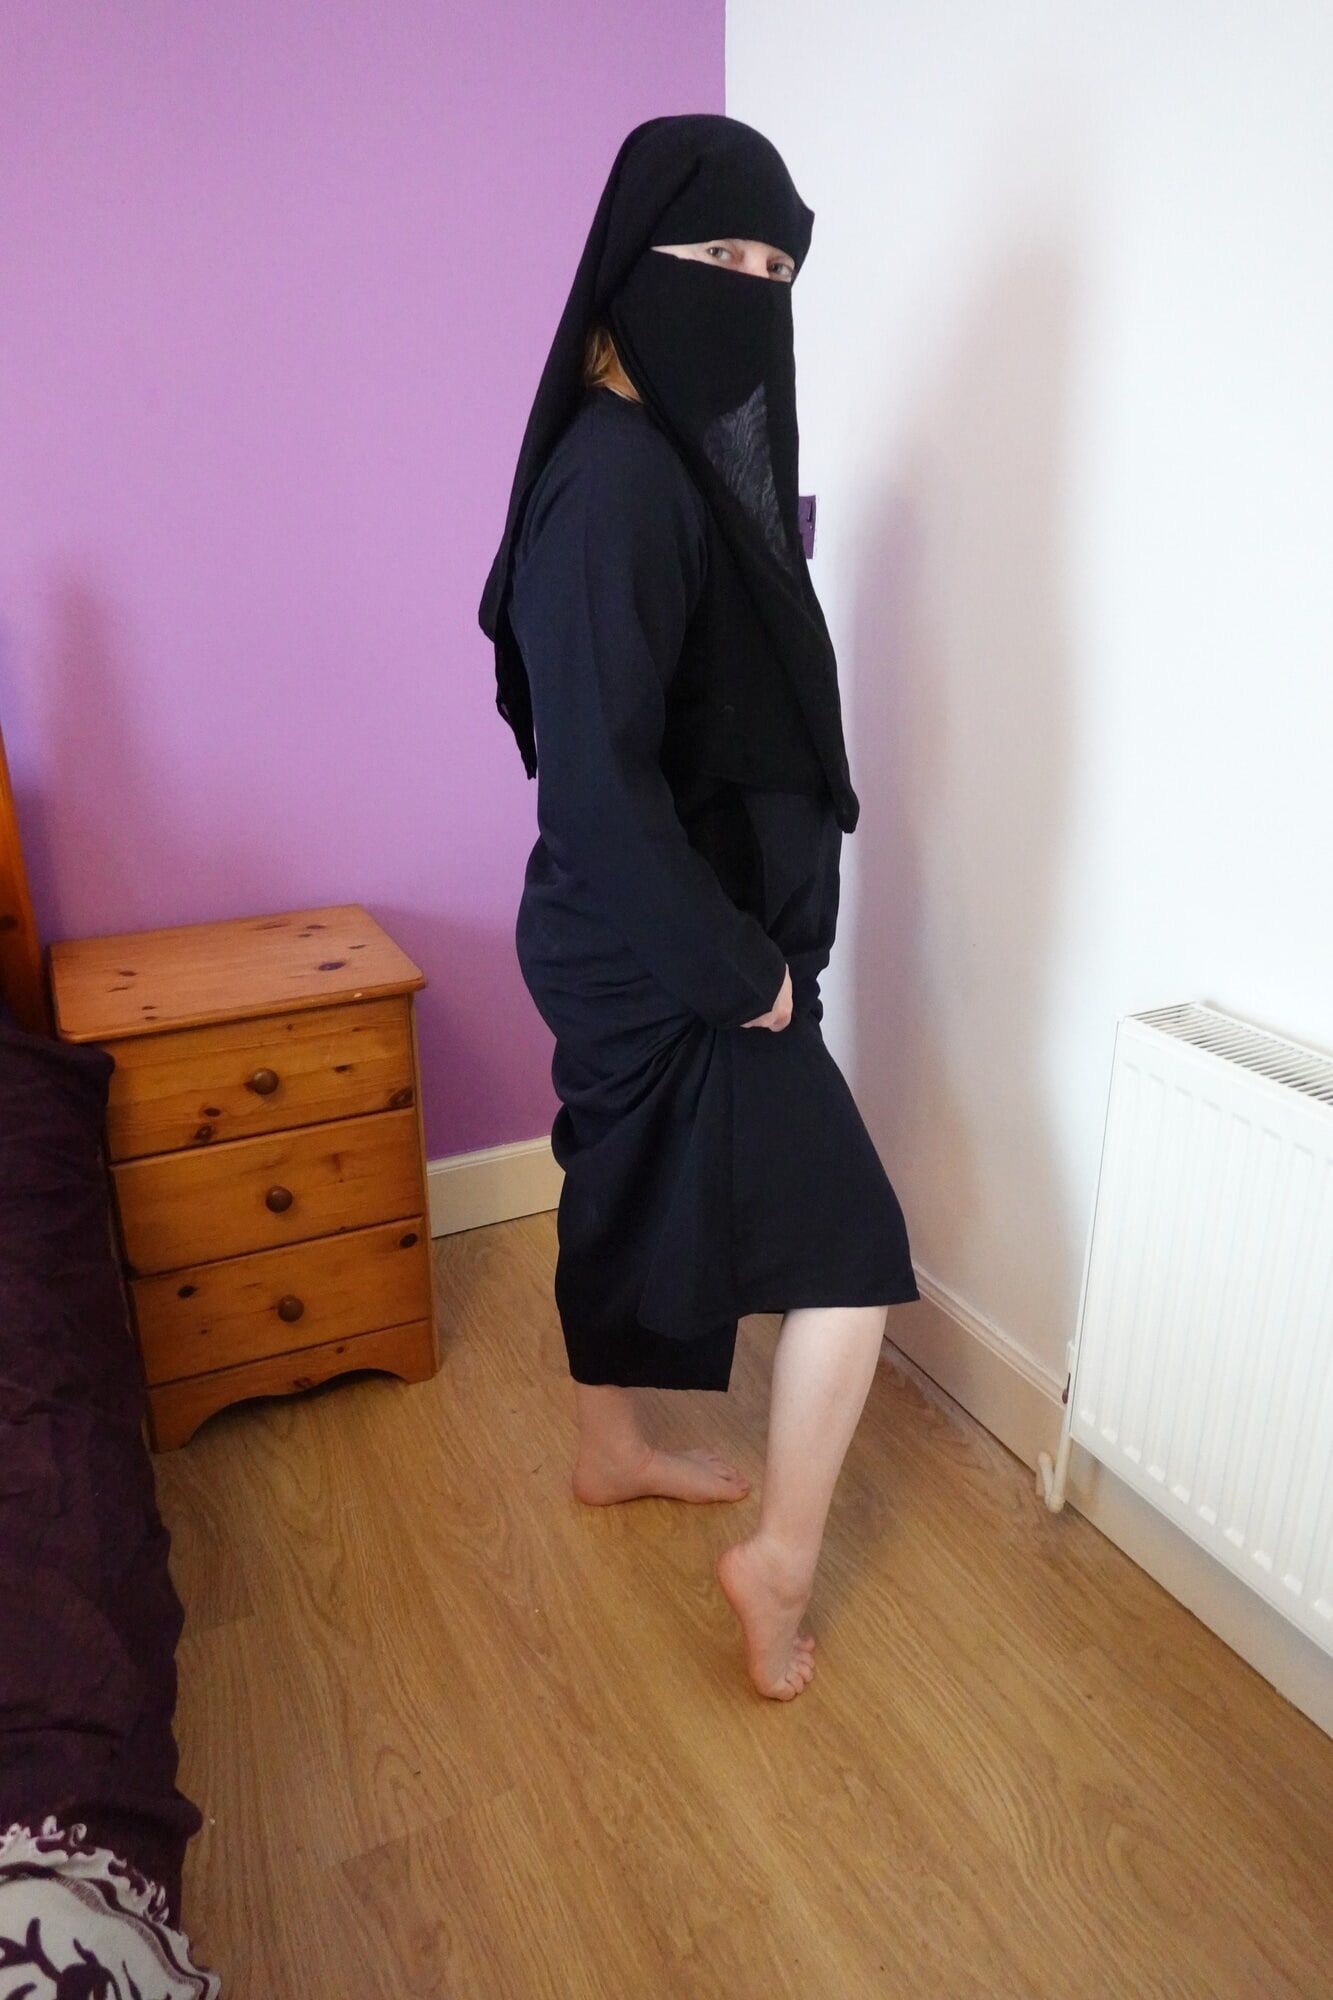 wife wearing Burqa with Niqab naked underneath #3